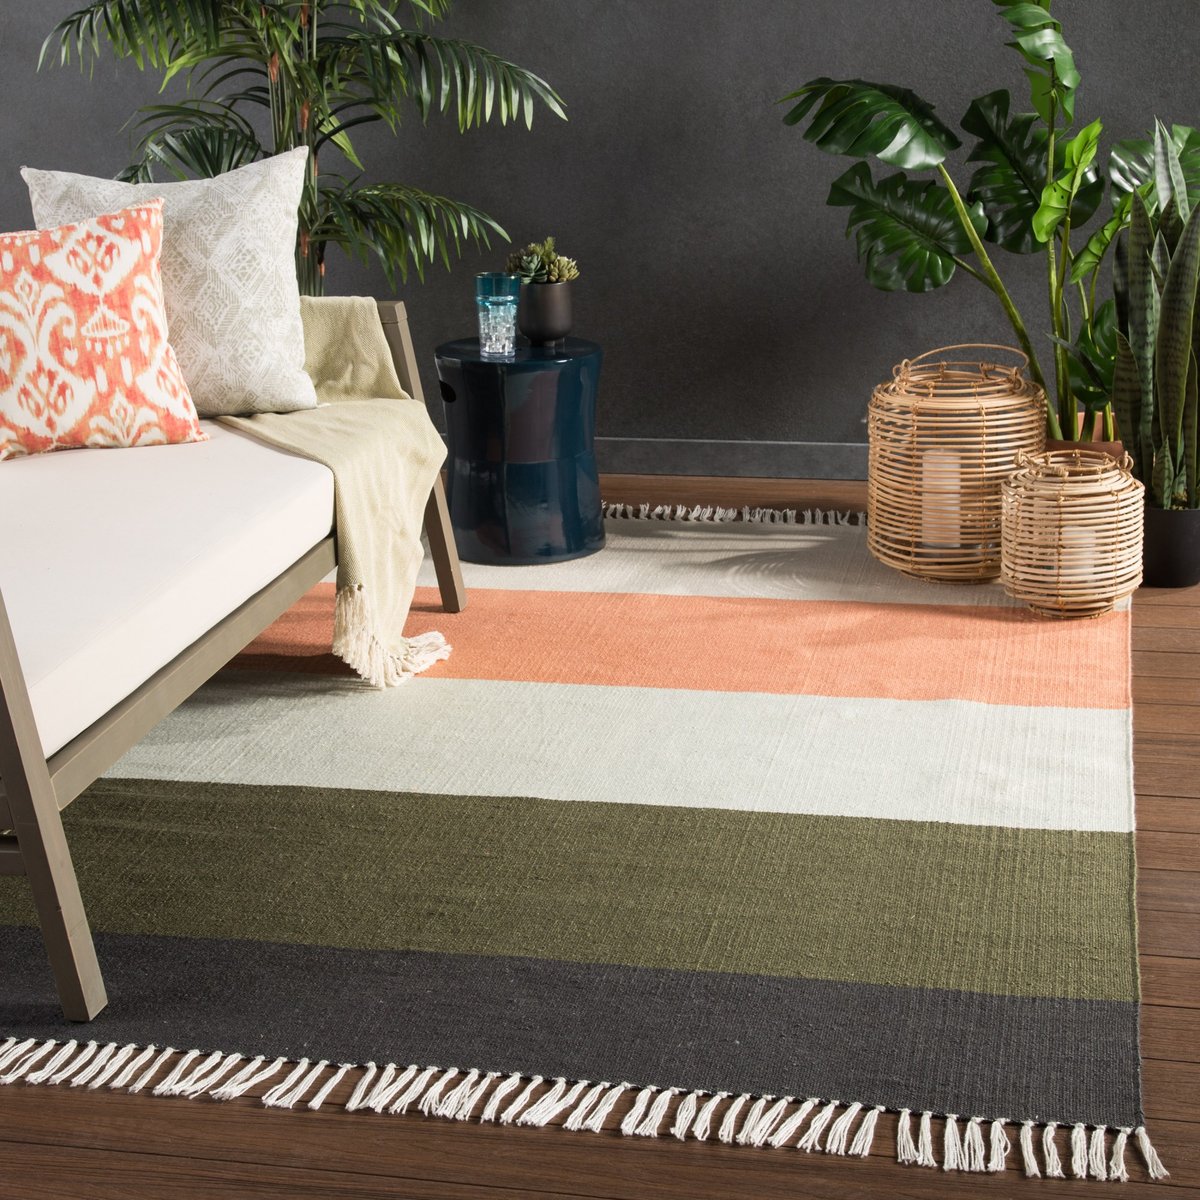 Soothing Stripes Outdoor Rug Ideas